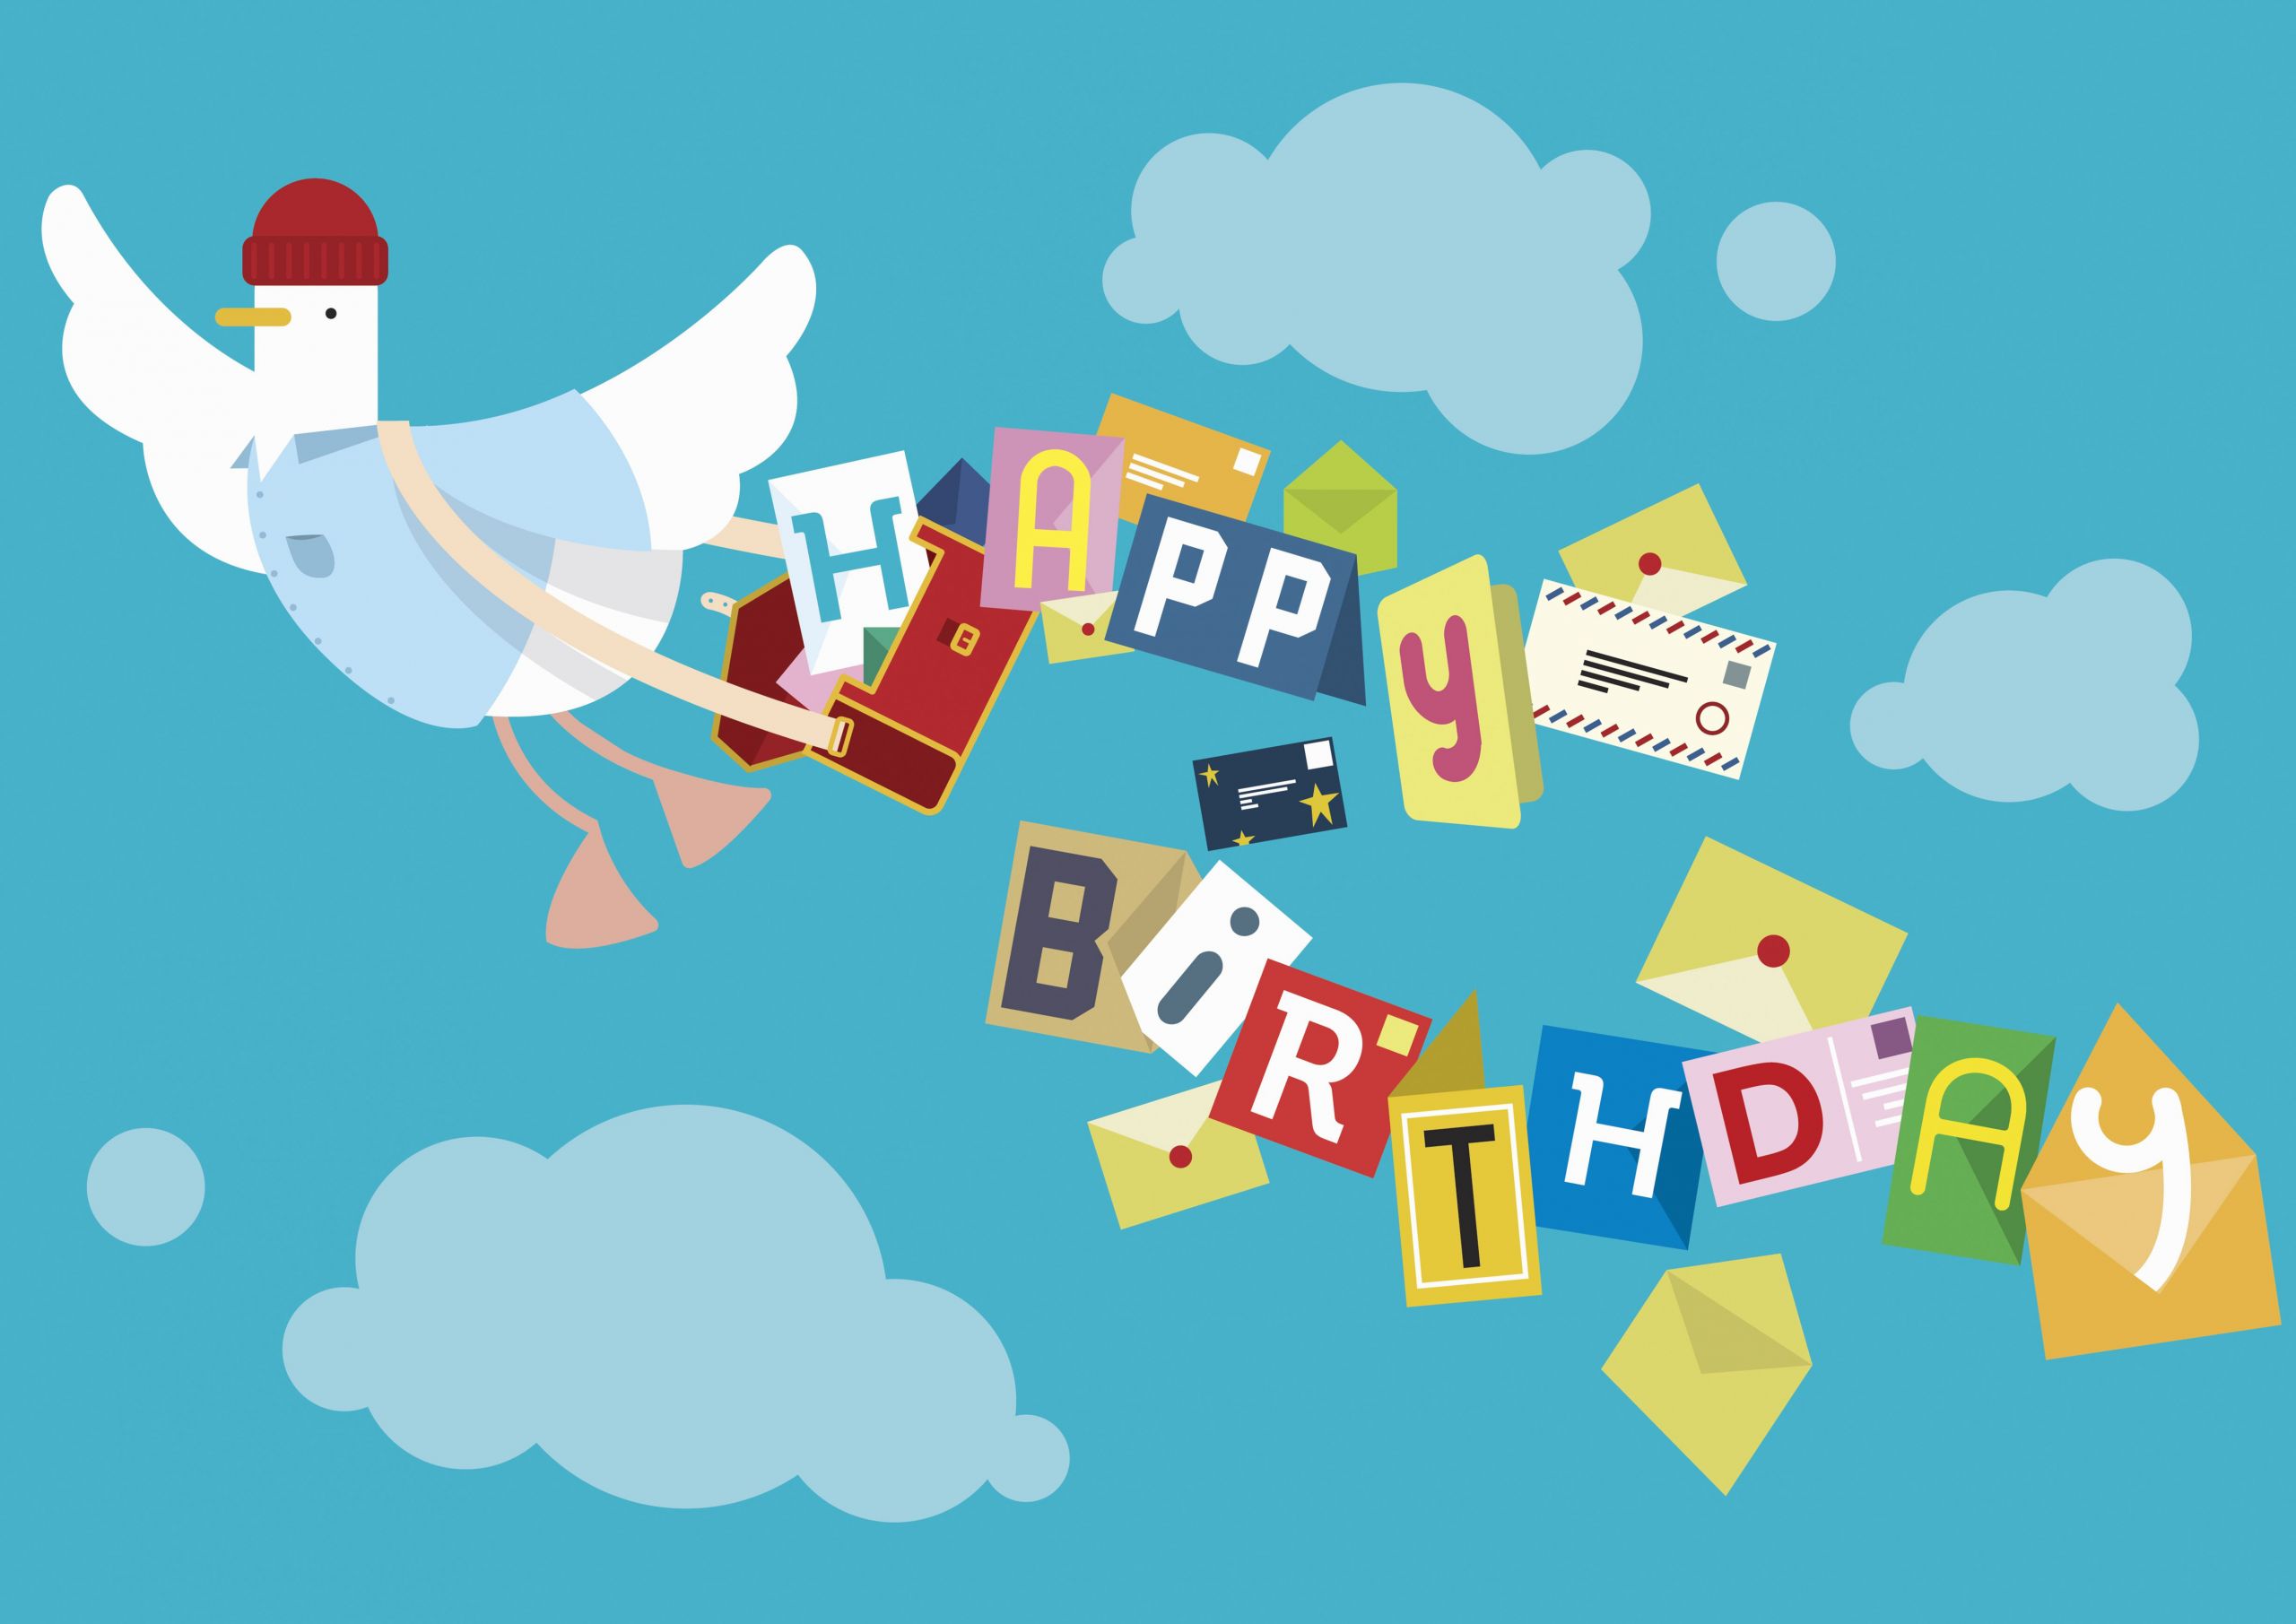 Funny Electronic Birthday Cards
 The 19 Top Birthday E Cards and Sites for 2020